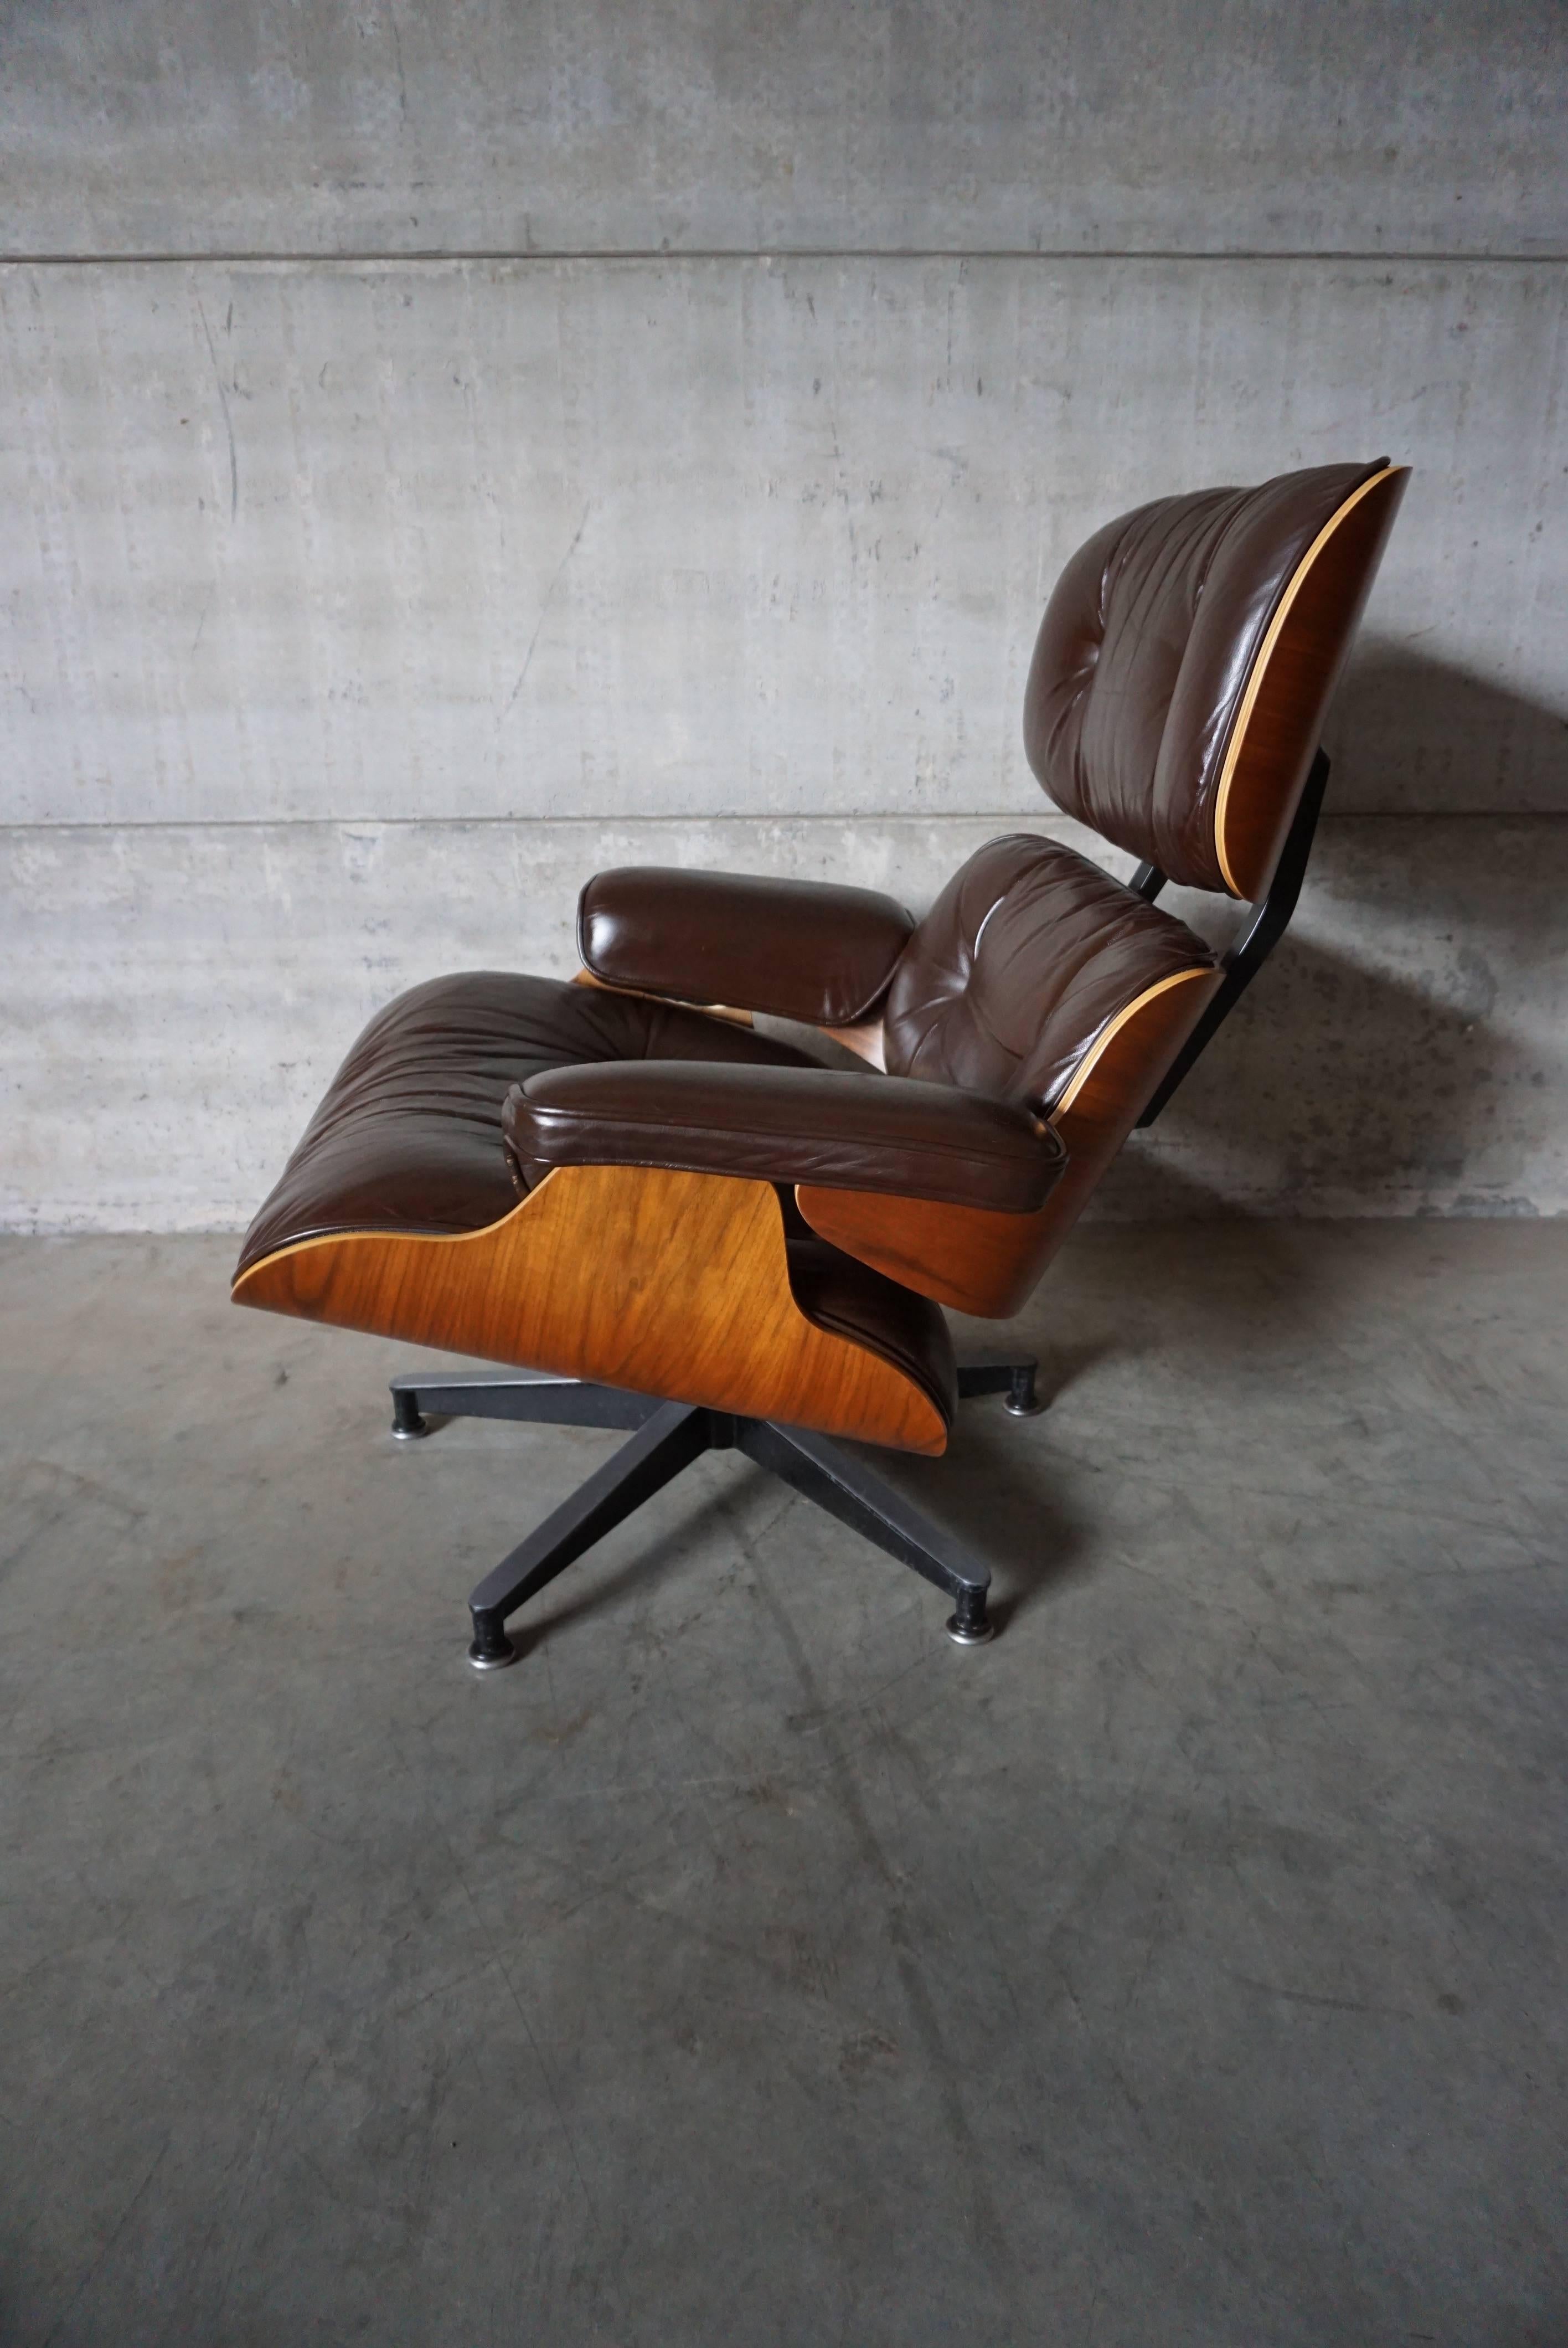 This model 670 lounge chair was designed by Charles & Ray Eames in 1956. This chair was produced in the 1990s by Herman Miller. They feature walnut veneer moulded plywood seat shells and dark brown leather-covered cushions resting on a cast